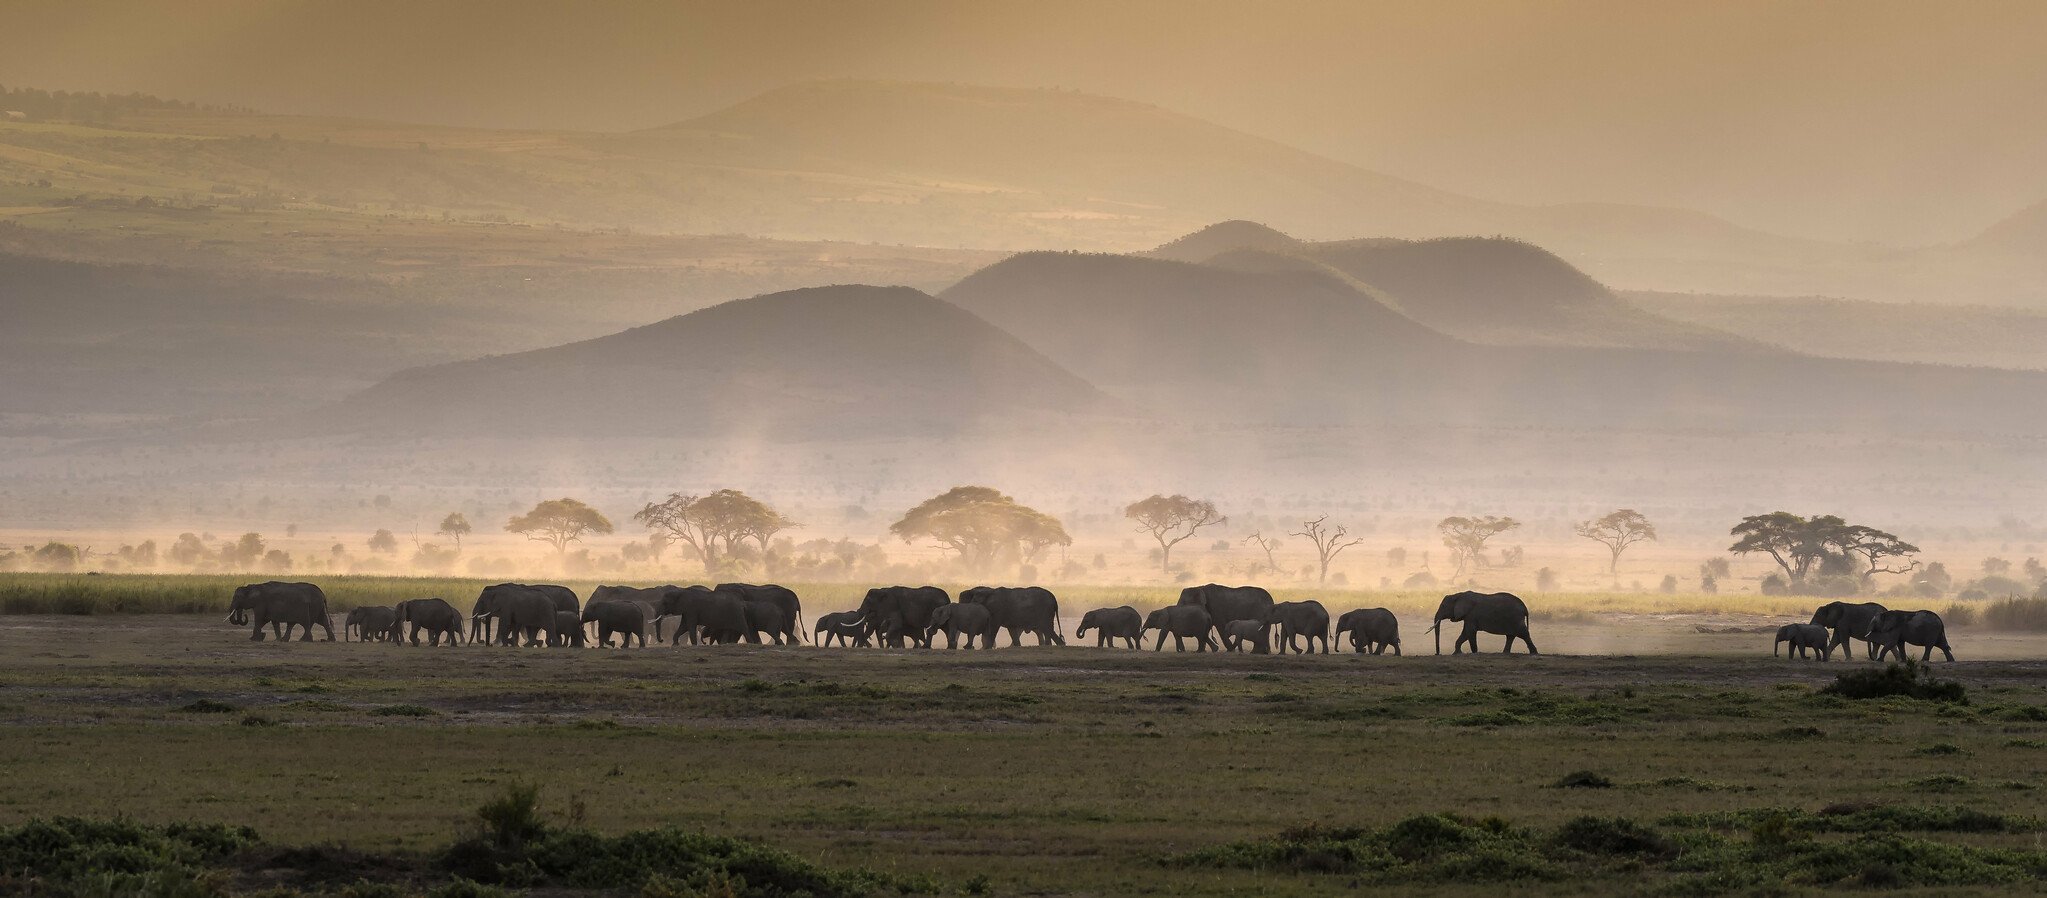 Elephant movement in East Africa